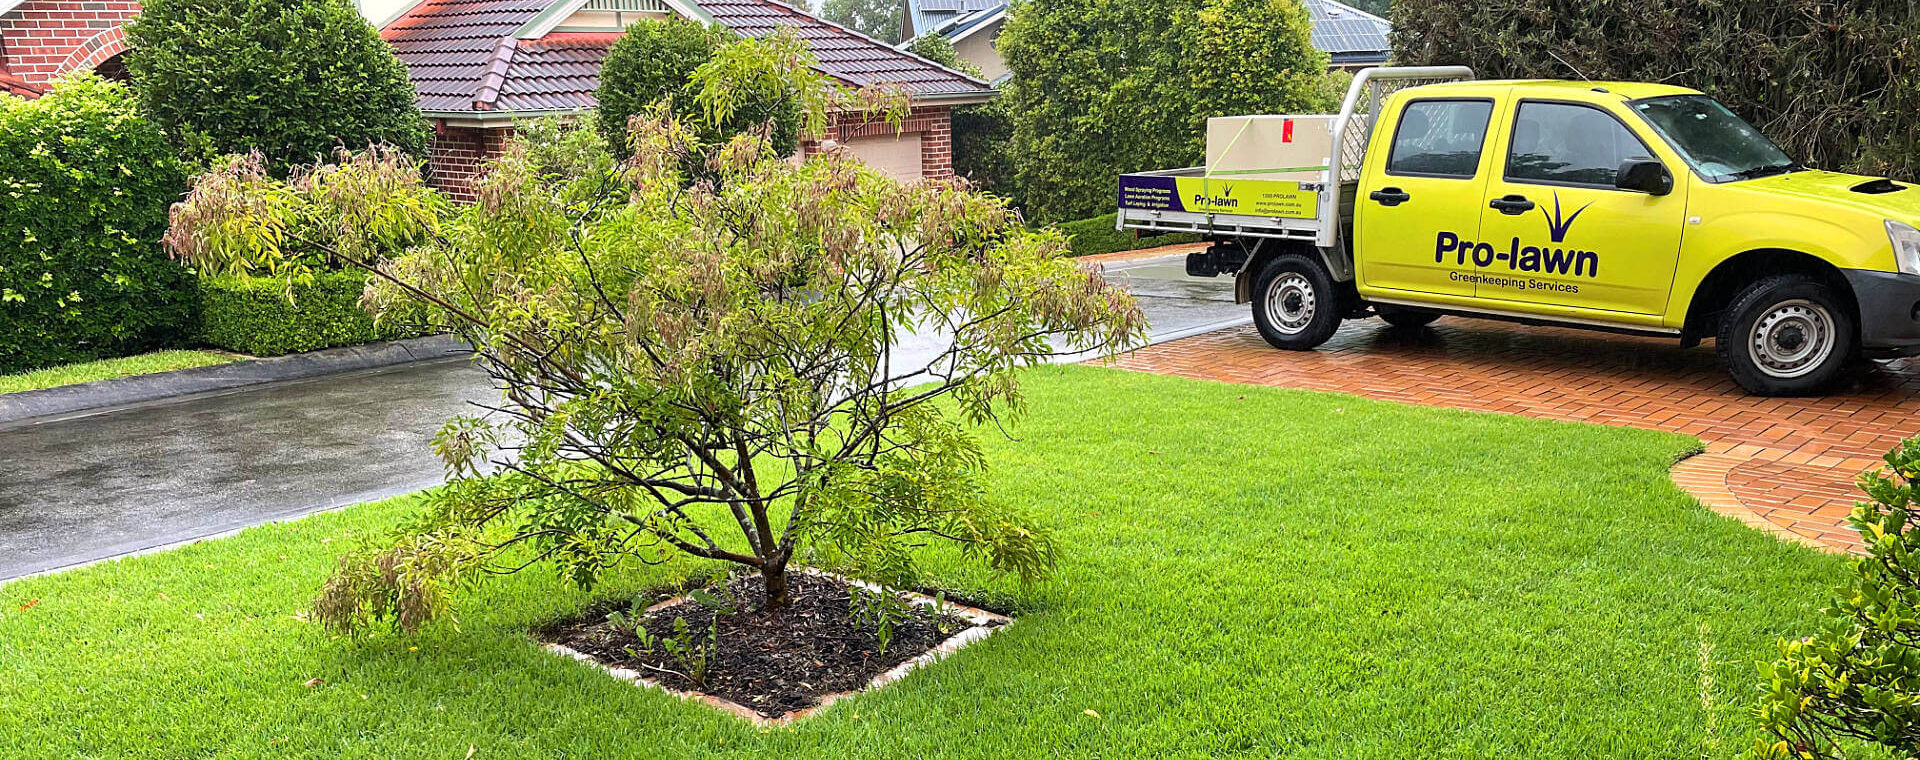 Lawn Care Professionals in <span>Hunters Hill</span>